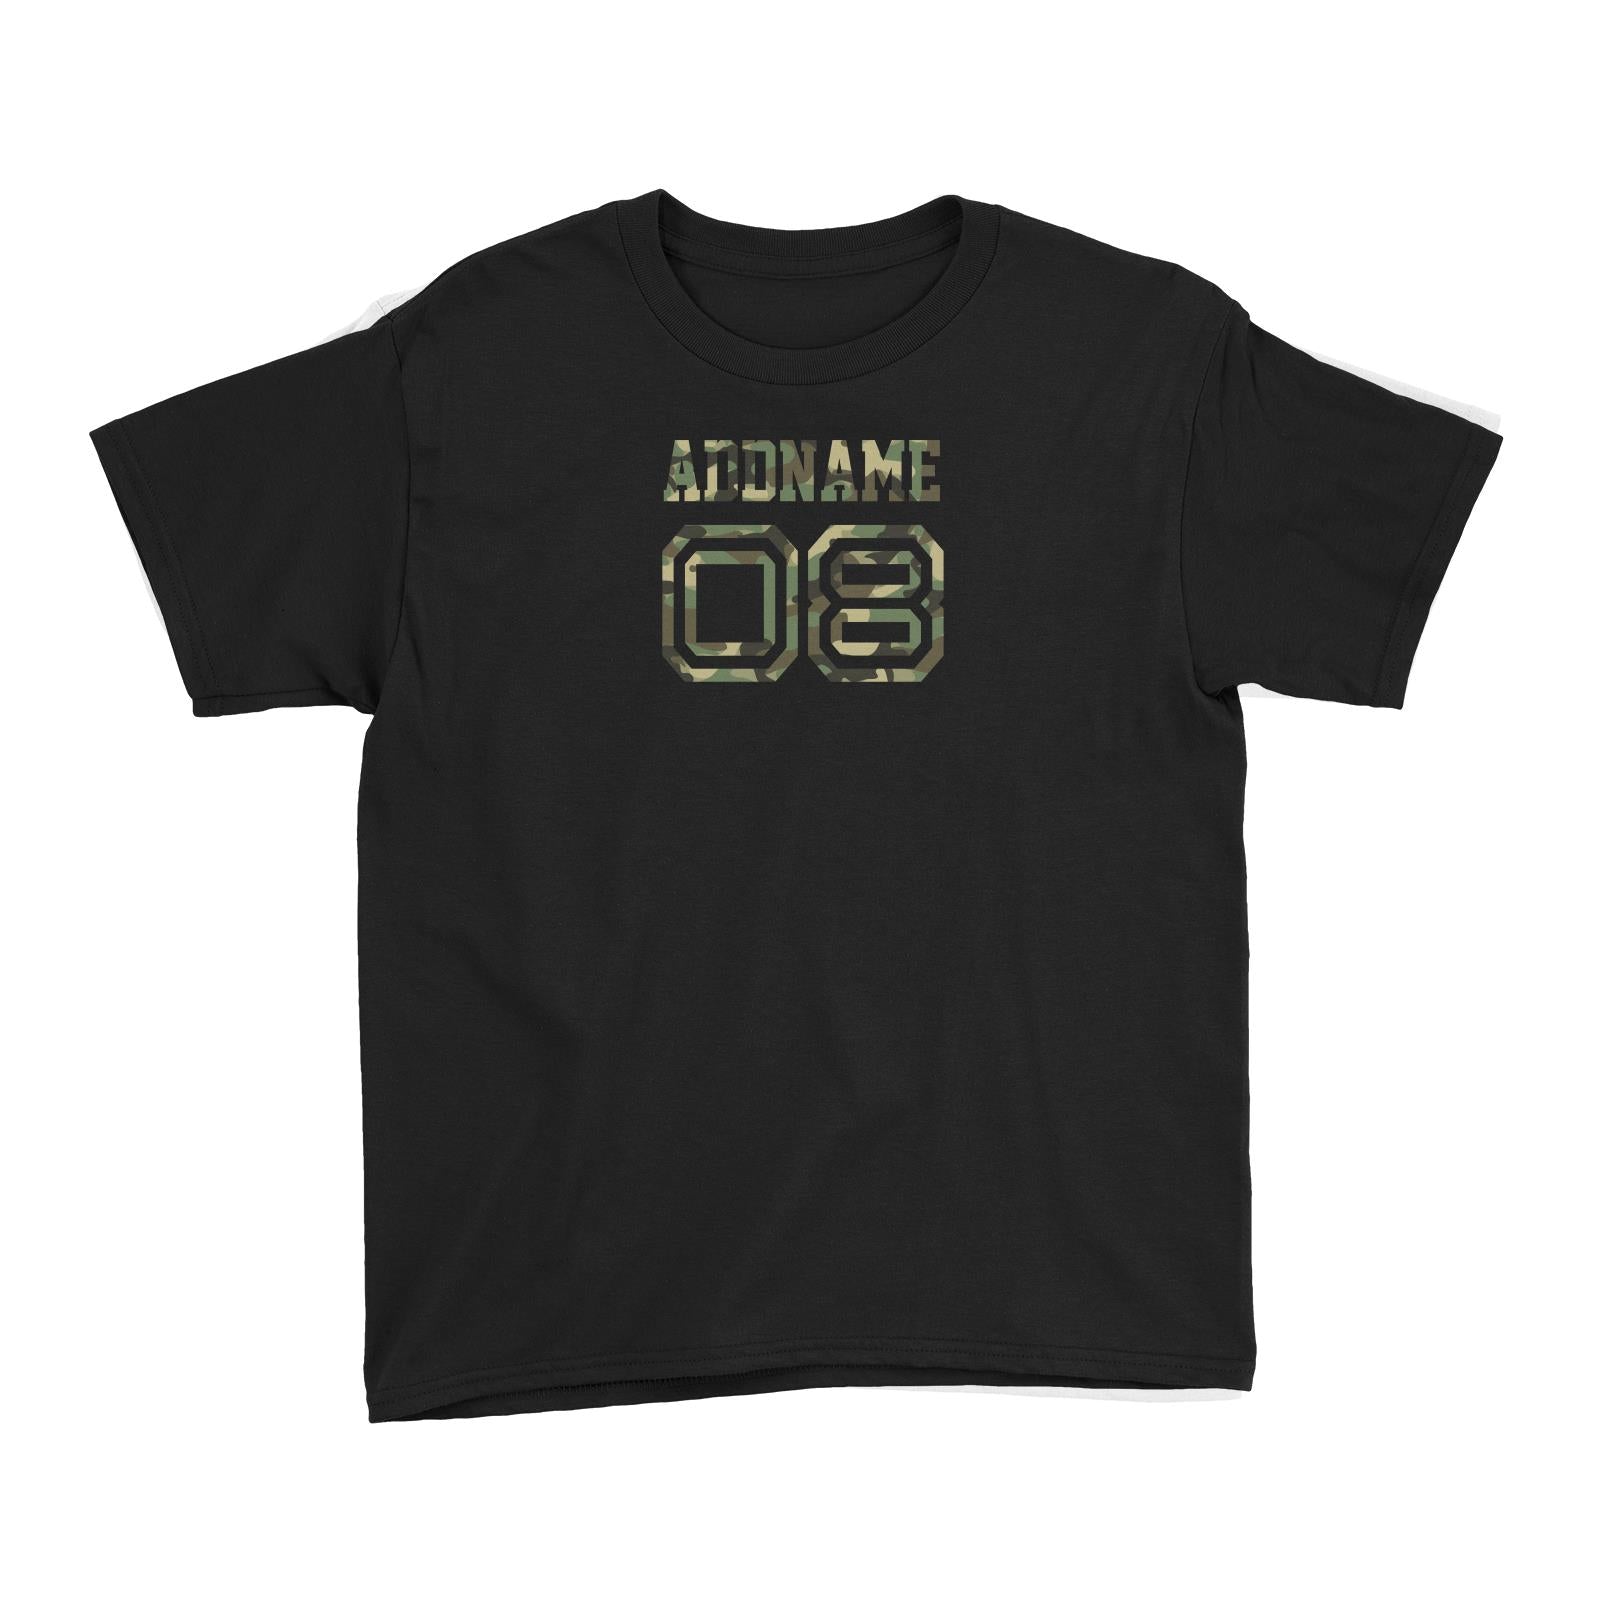 Camo Name Number Family Addname Kid's T-Shirt